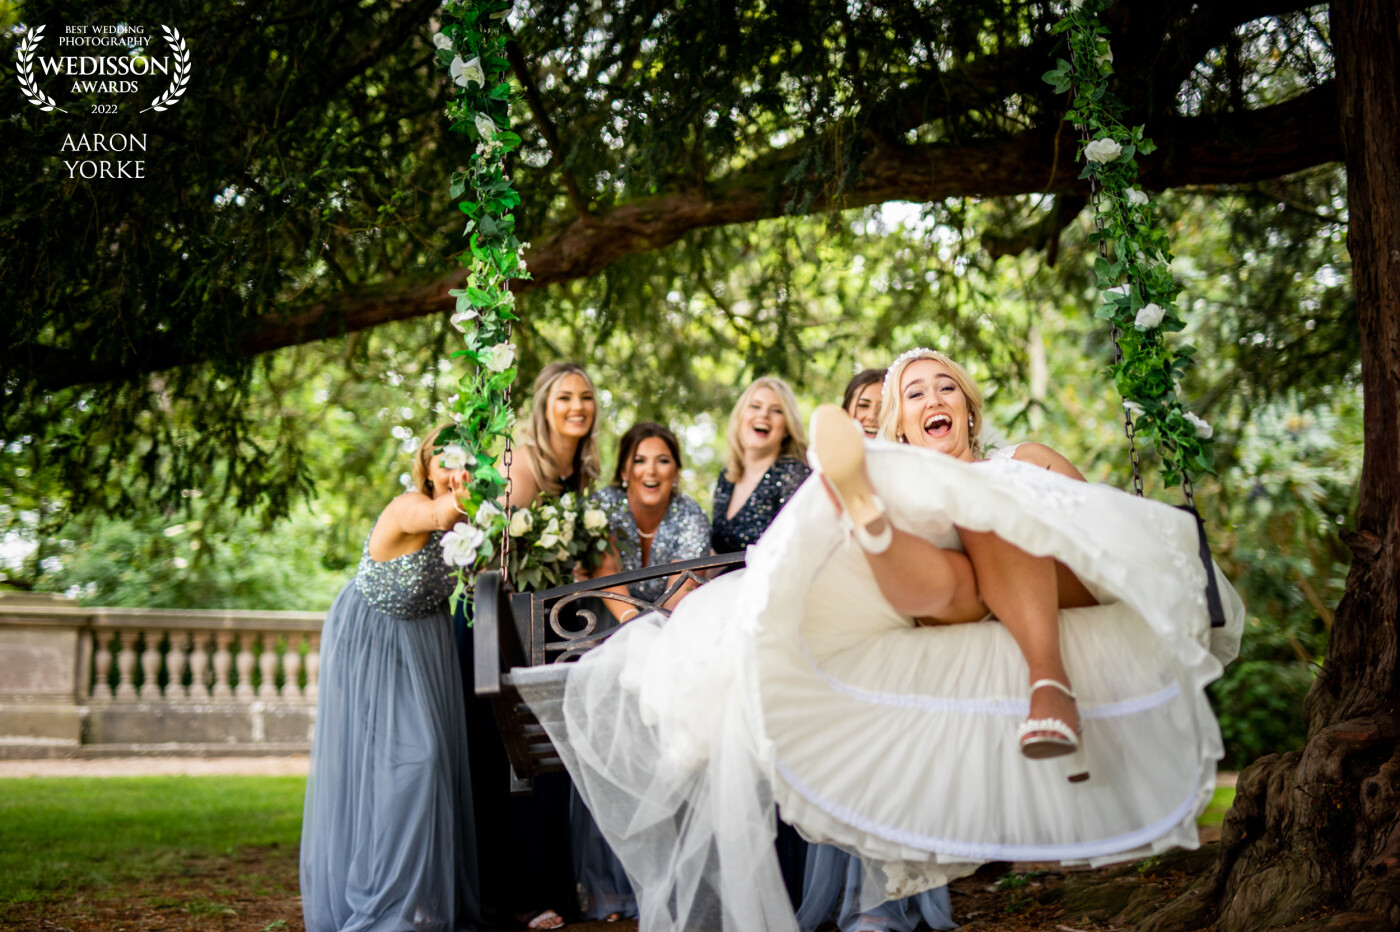 At Wood Norton Wedding Venue in Worcester UK there is an awesome tree swing which is just perfect for nice photographs of newly married couples. In this phot I went for a more fun photo with the bride and her bridesmaids pushing her eon the swing!